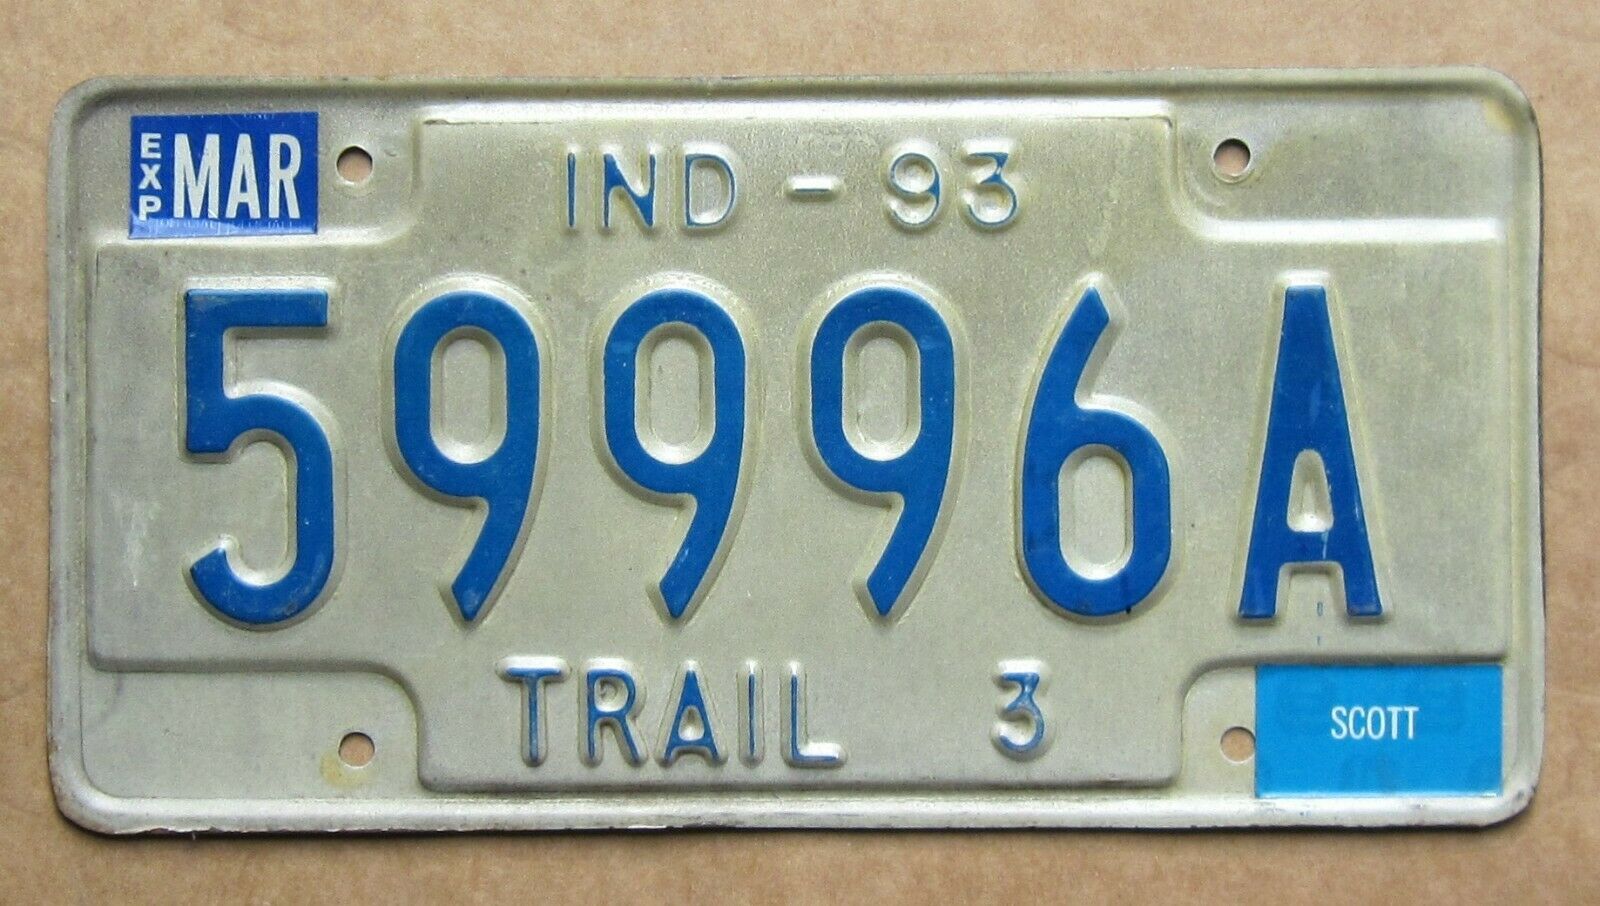 1993 Indiana License Plate Scott County Tag 59996a